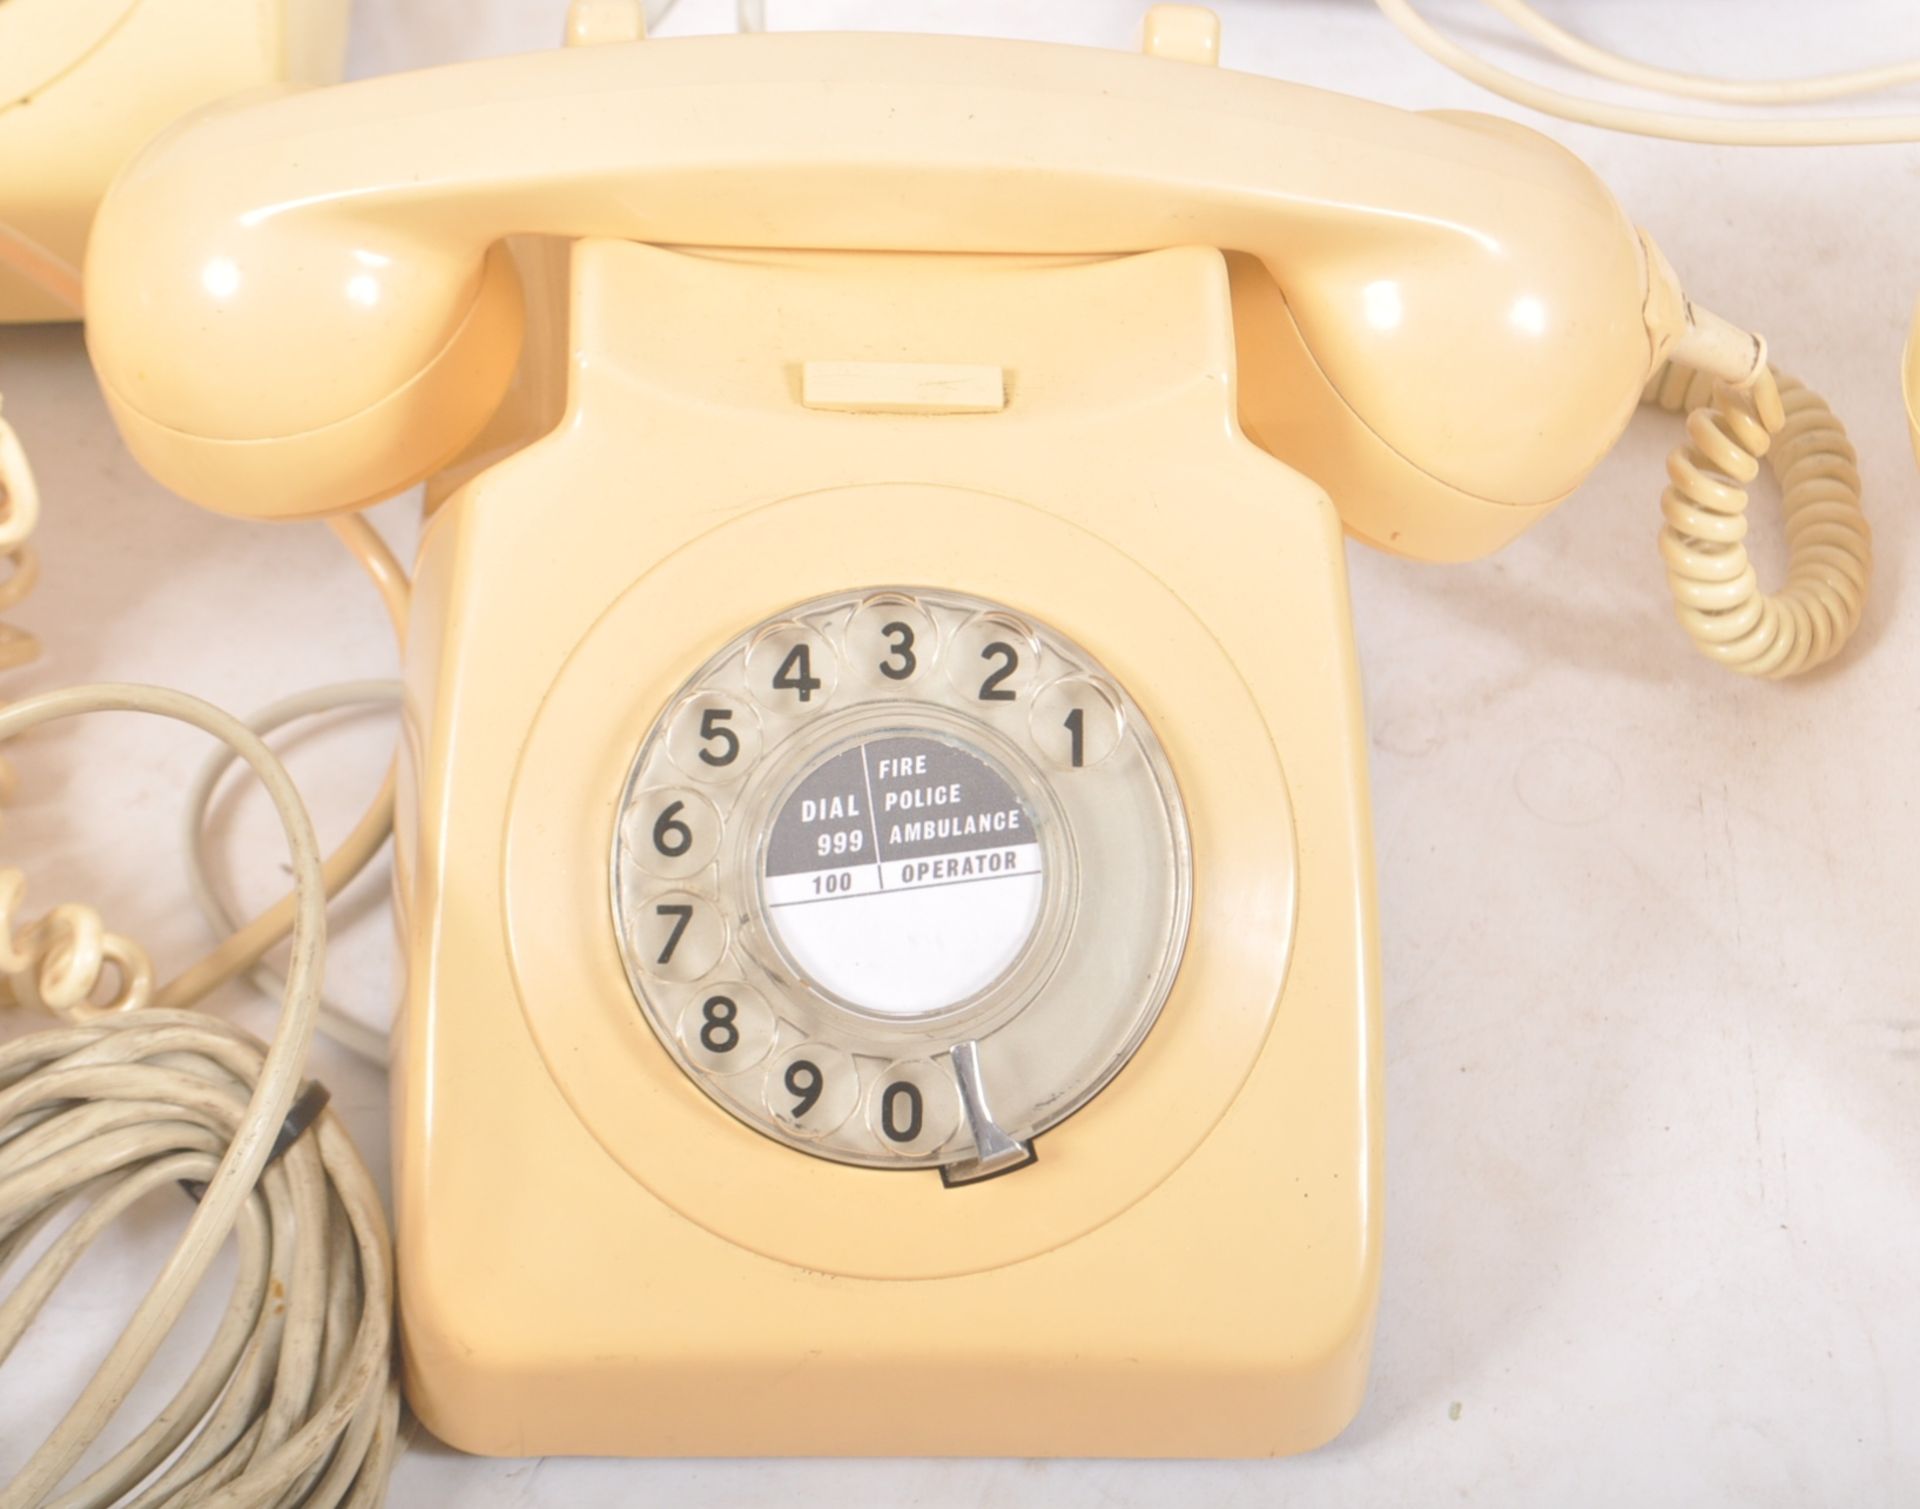 COLLECTION OF ELEVEN VINTAGE 1970S ROTARY DIAL GPO TELEPHONES - Image 4 of 5